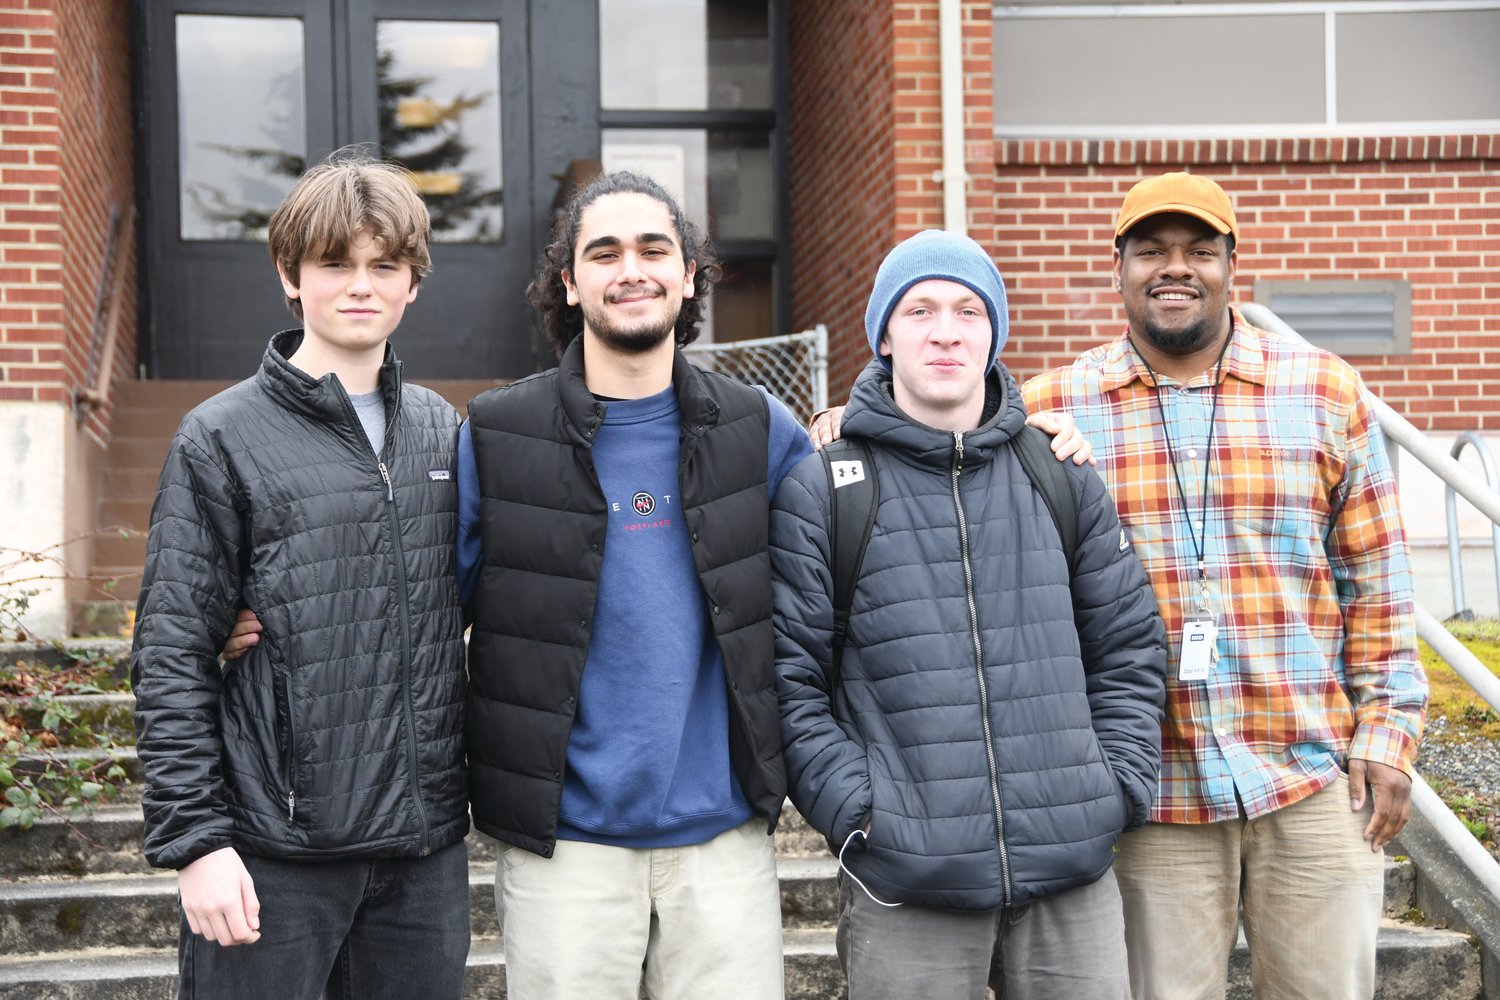 Port Townsend seniors Michael Petta, Lorenzo McCleese, Toby Fulton, and school wellness director Darrell Thomas pose outside the Gael Stuart Building on the Port Townsend High School campus.